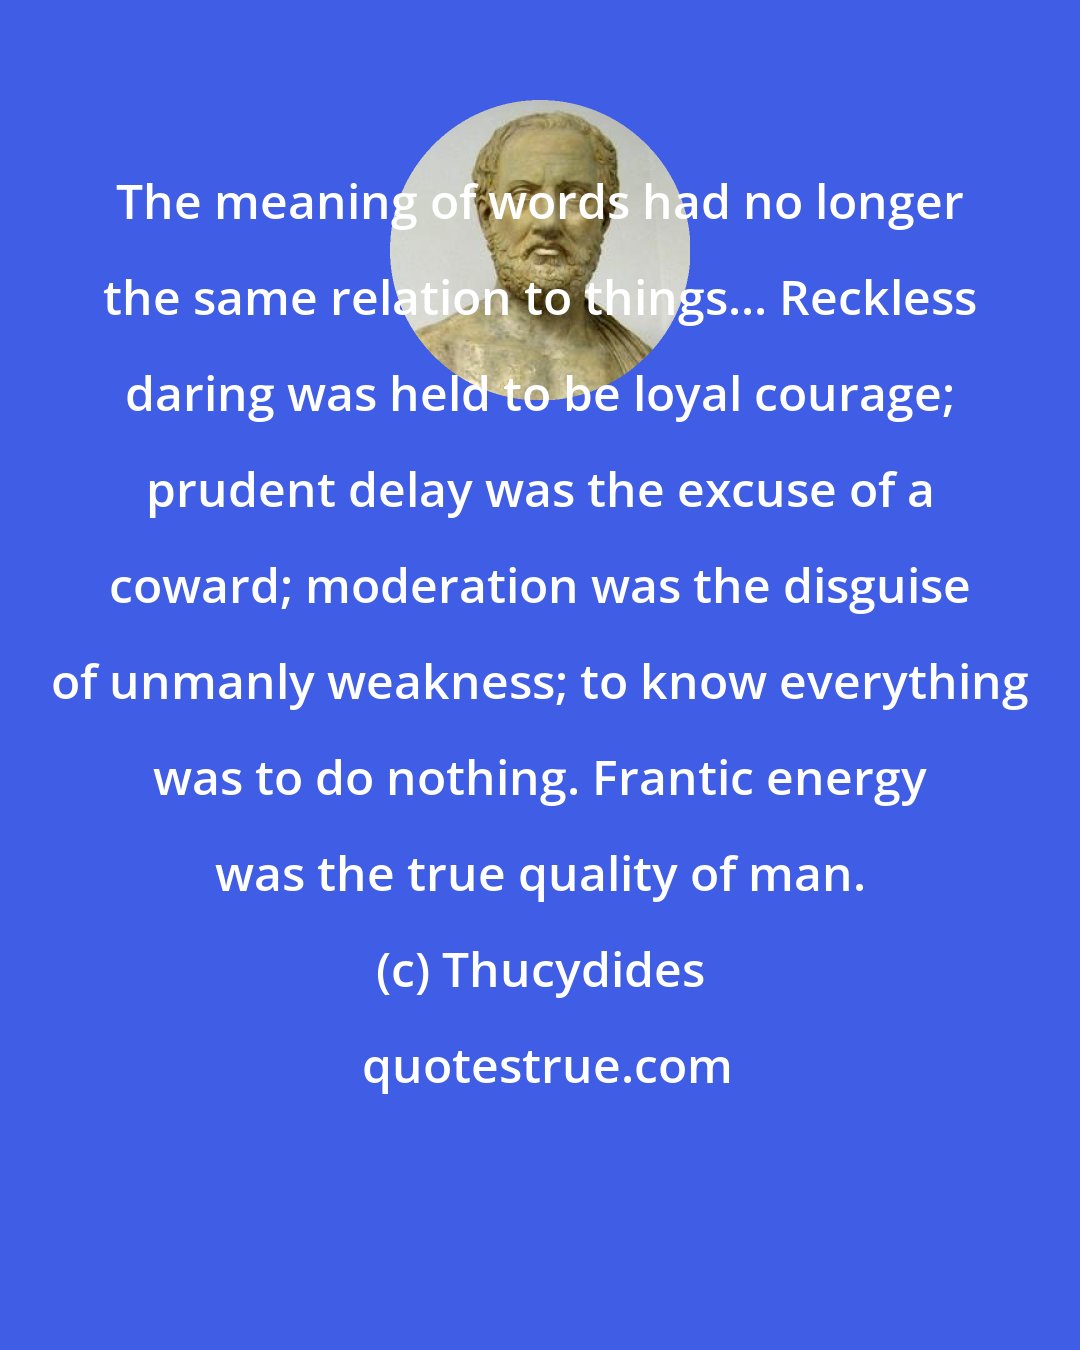 Thucydides: The meaning of words had no longer the same relation to things... Reckless daring was held to be loyal courage; prudent delay was the excuse of a coward; moderation was the disguise of unmanly weakness; to know everything was to do nothing. Frantic energy was the true quality of man.